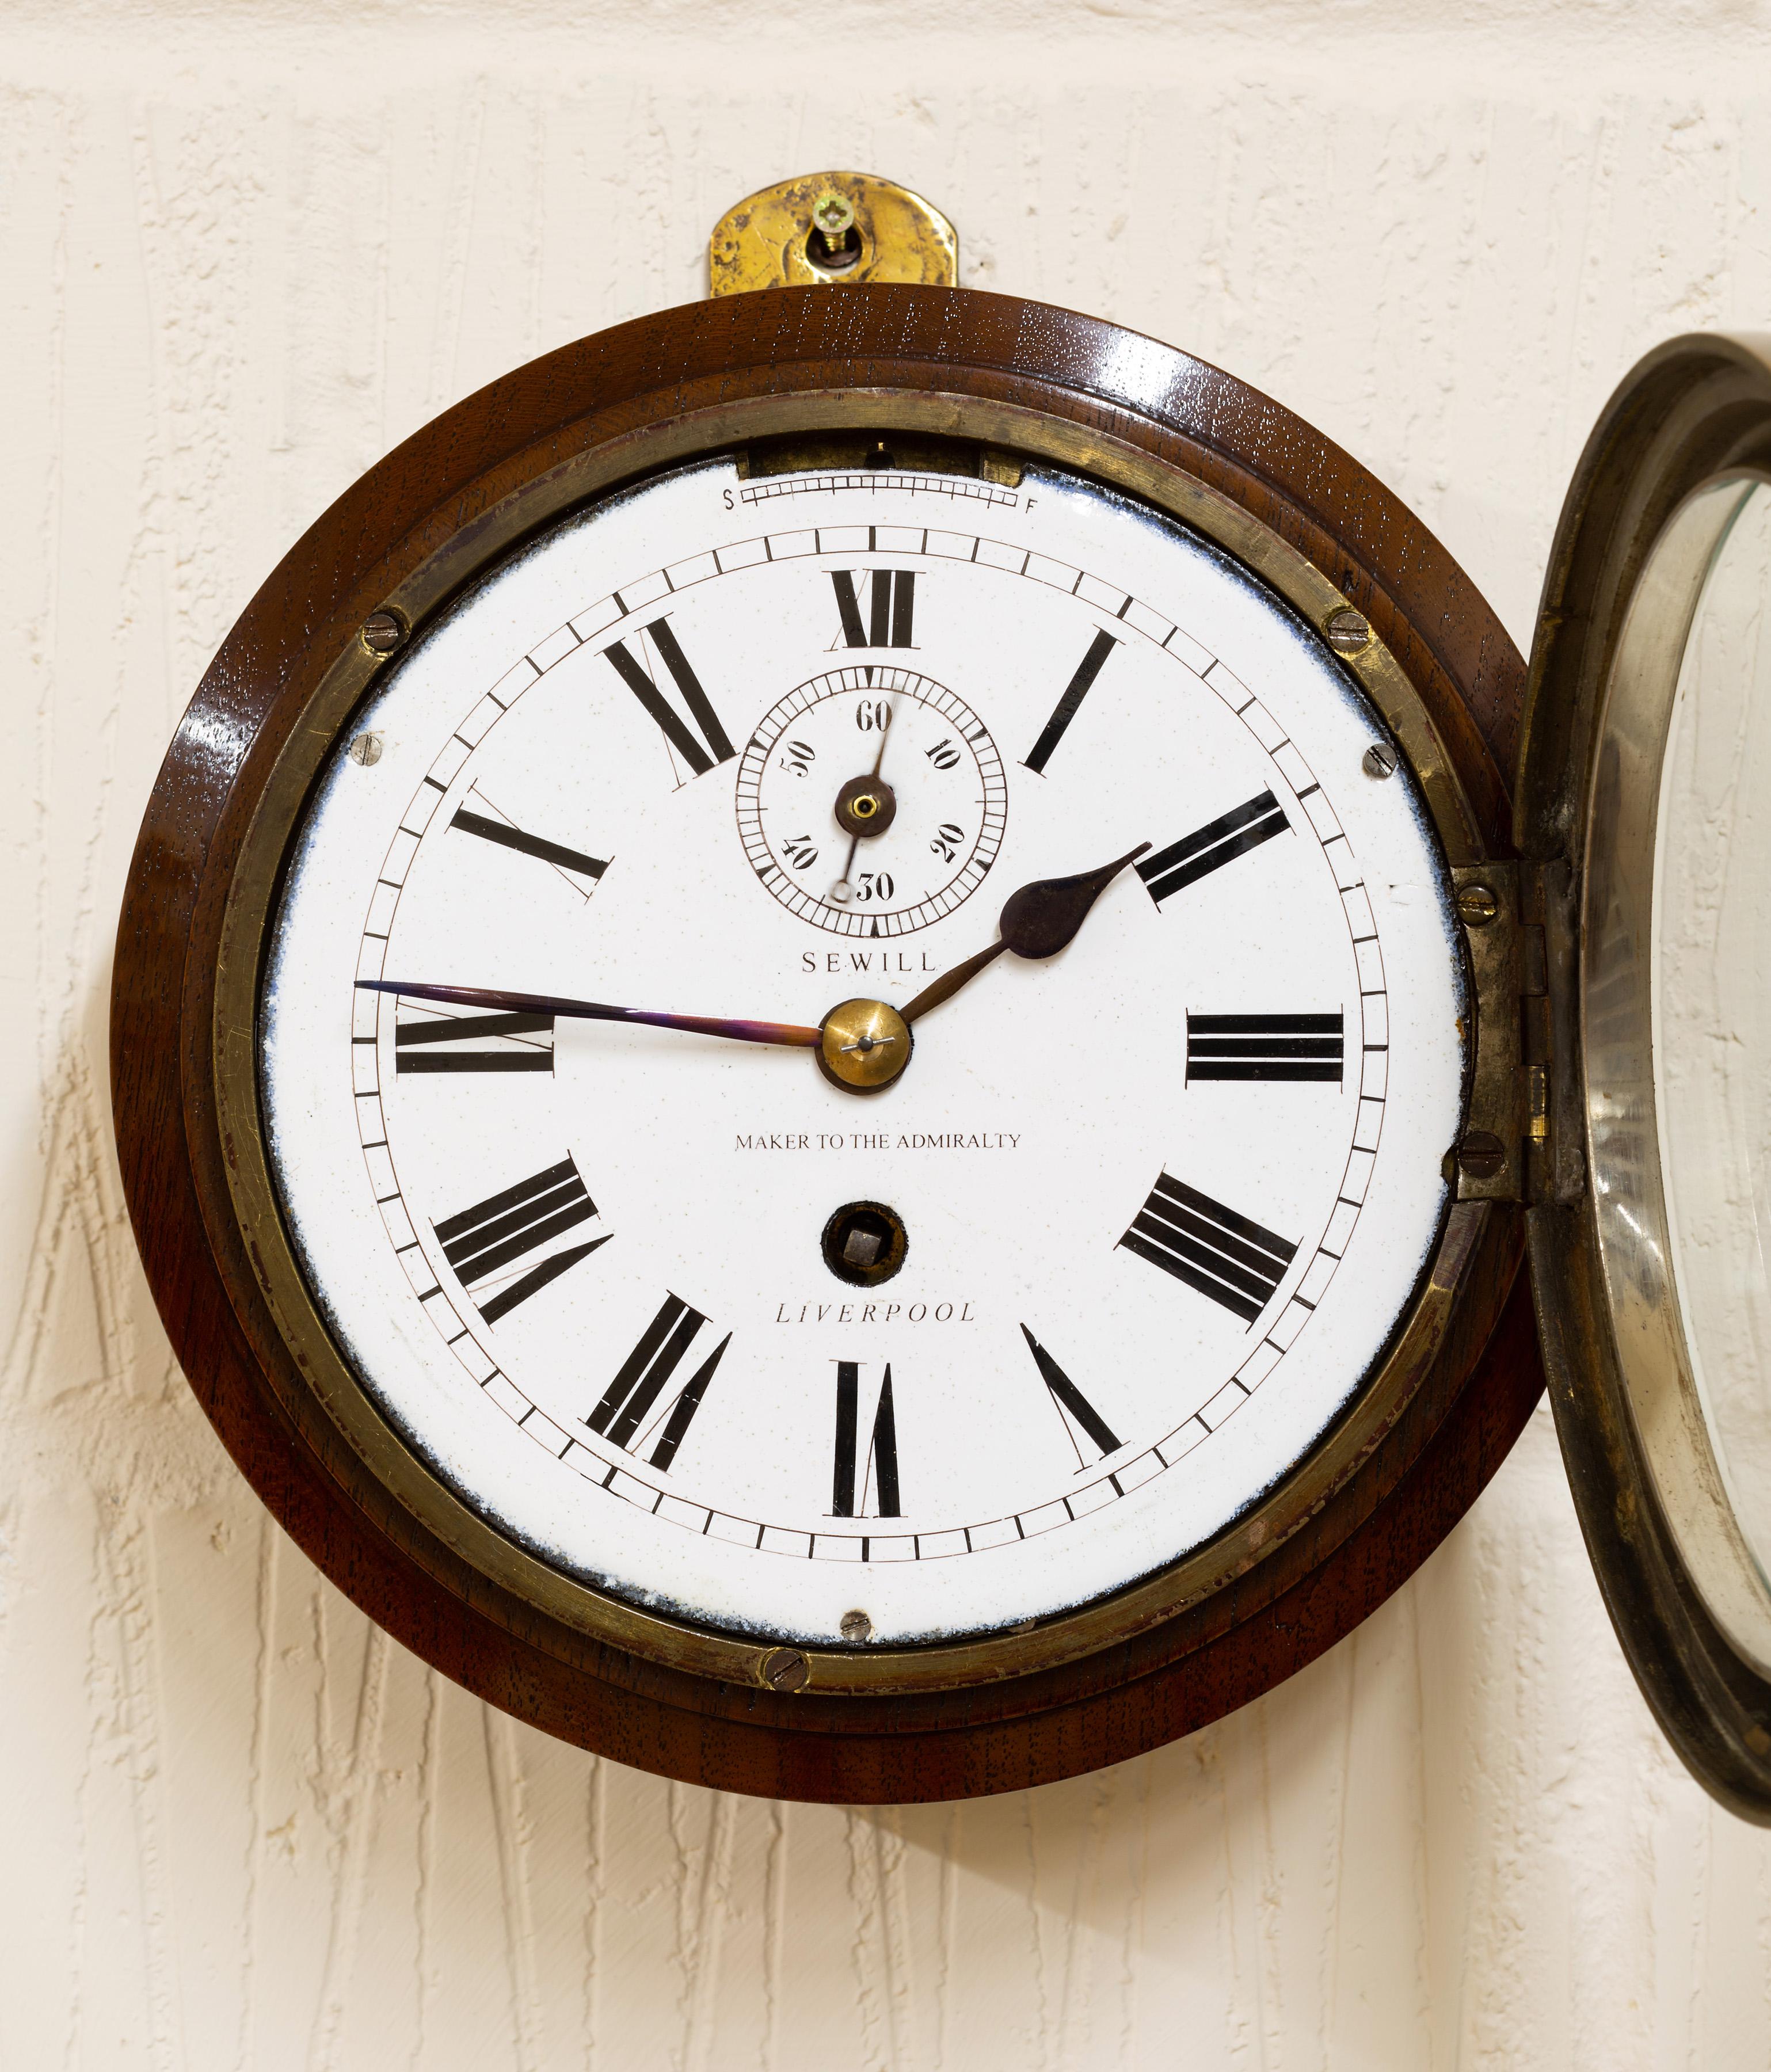 Brass ships clock with a mahogany surround, enamel dial with Roman numerals, original ‘blued’ steel hands with subsidiary dial below the XII for seconds and signed ‘Sewill, maker to the admiralty, Liverpool’.


Eight day chain Fusee movement with